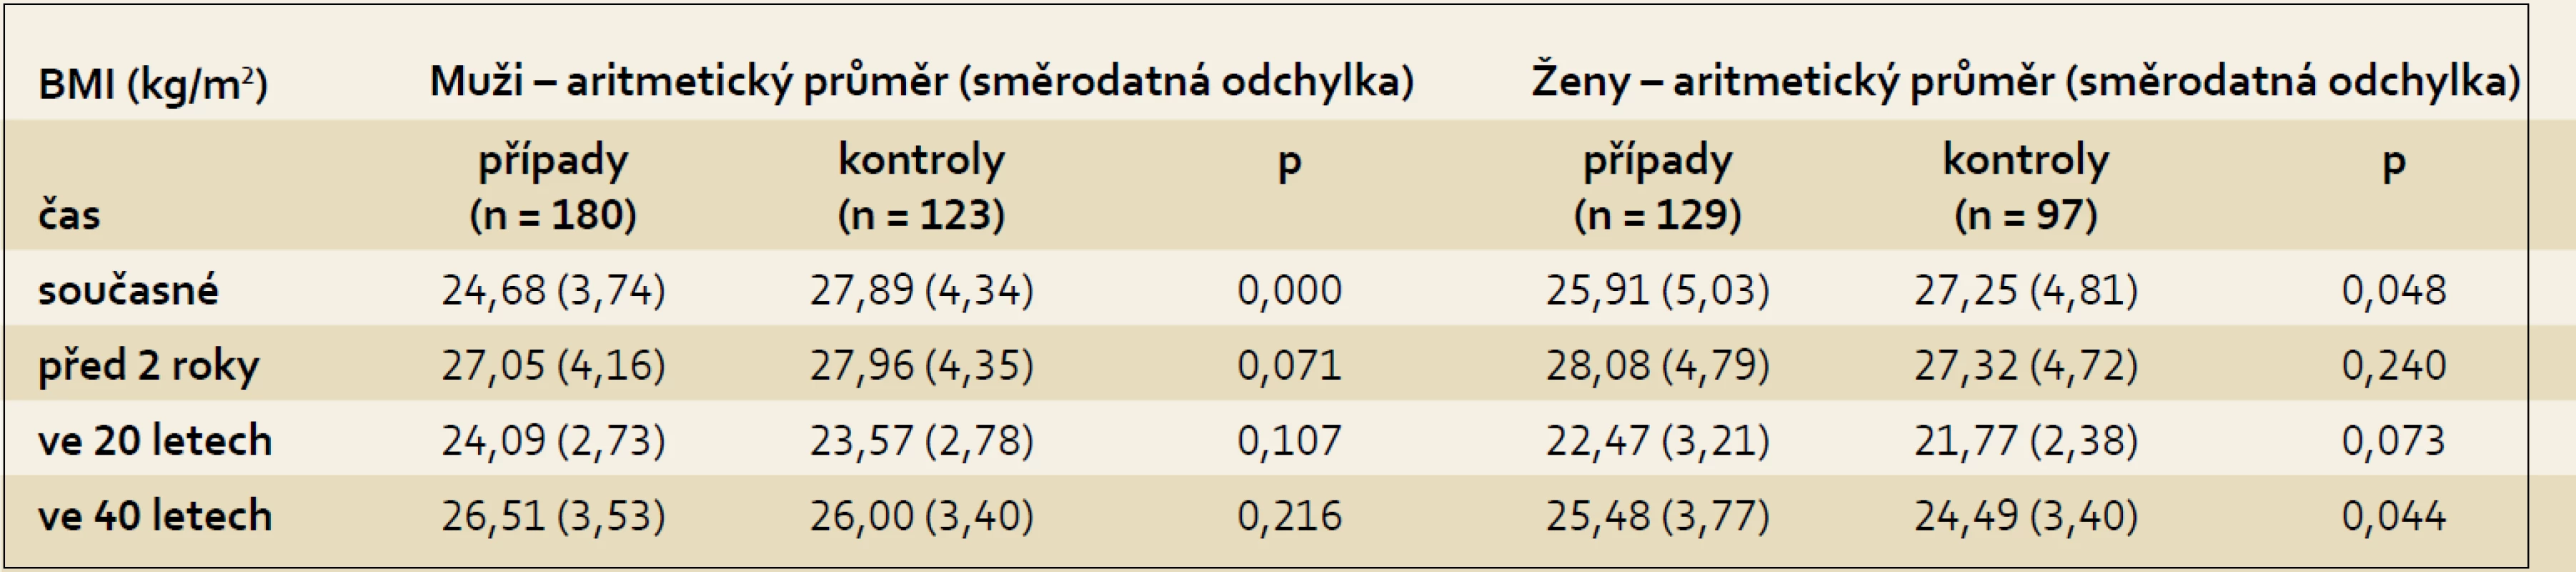 Hodnoty BMI u případů a kontrol dle pohlaví.
Tab. 2. BMI values in cases and controls according to gender in the pancreatic cancer study.